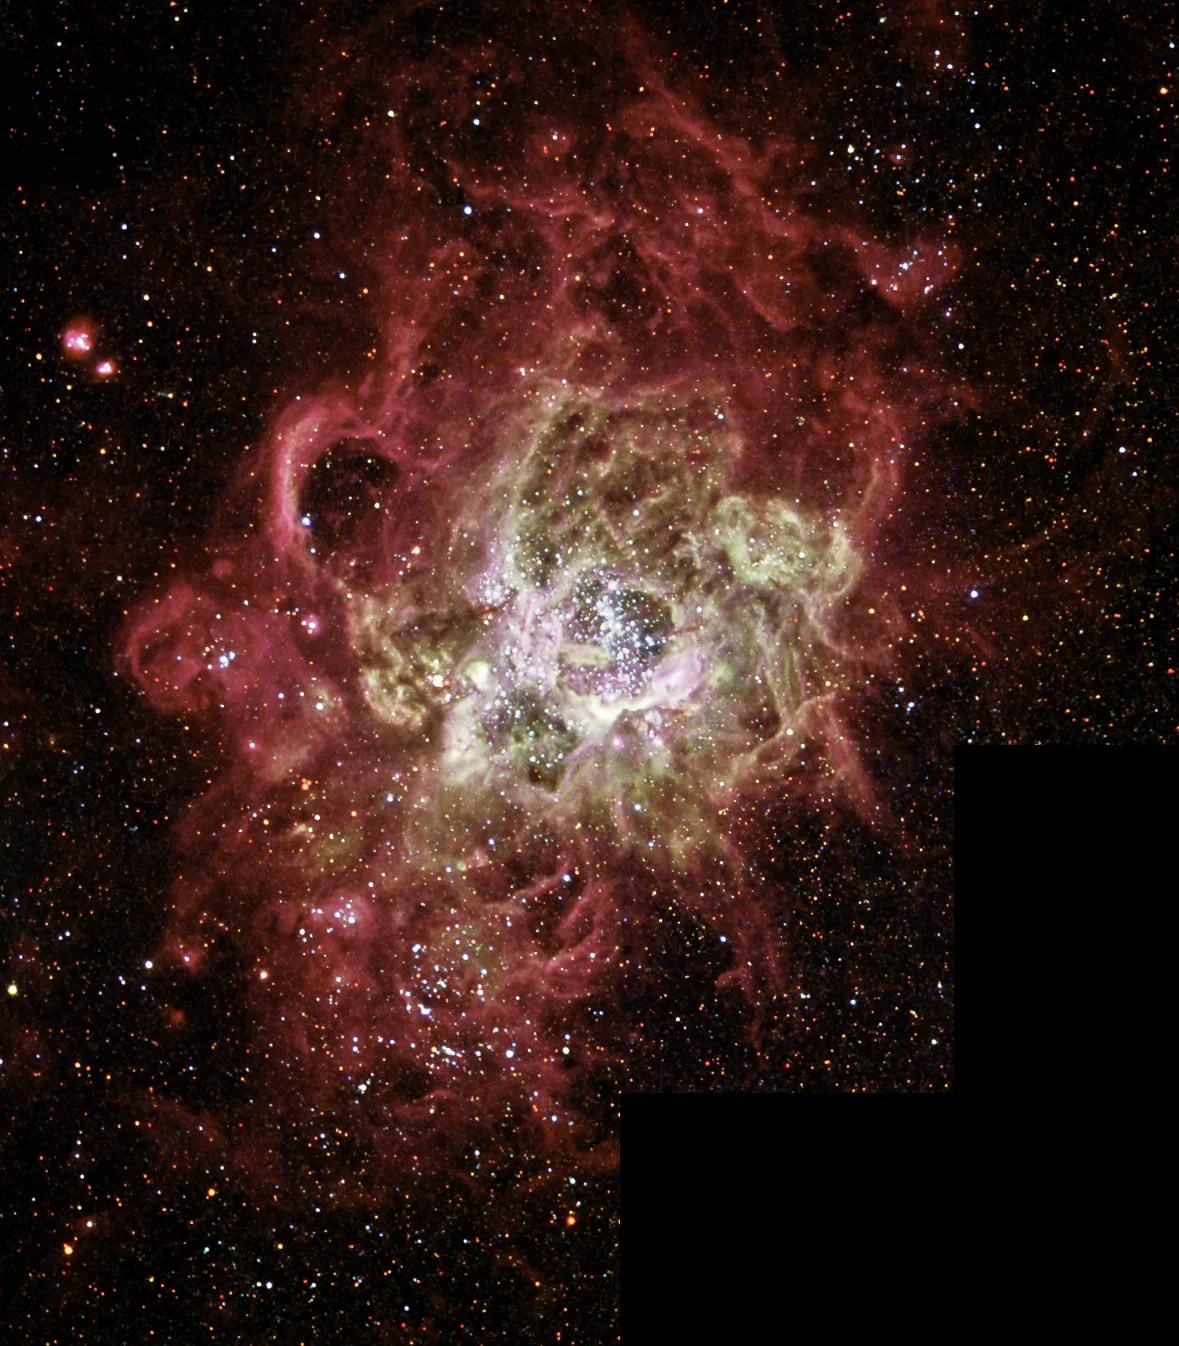 A star-forming nebula NGC 604 with red, white, and olive green gas and stars.